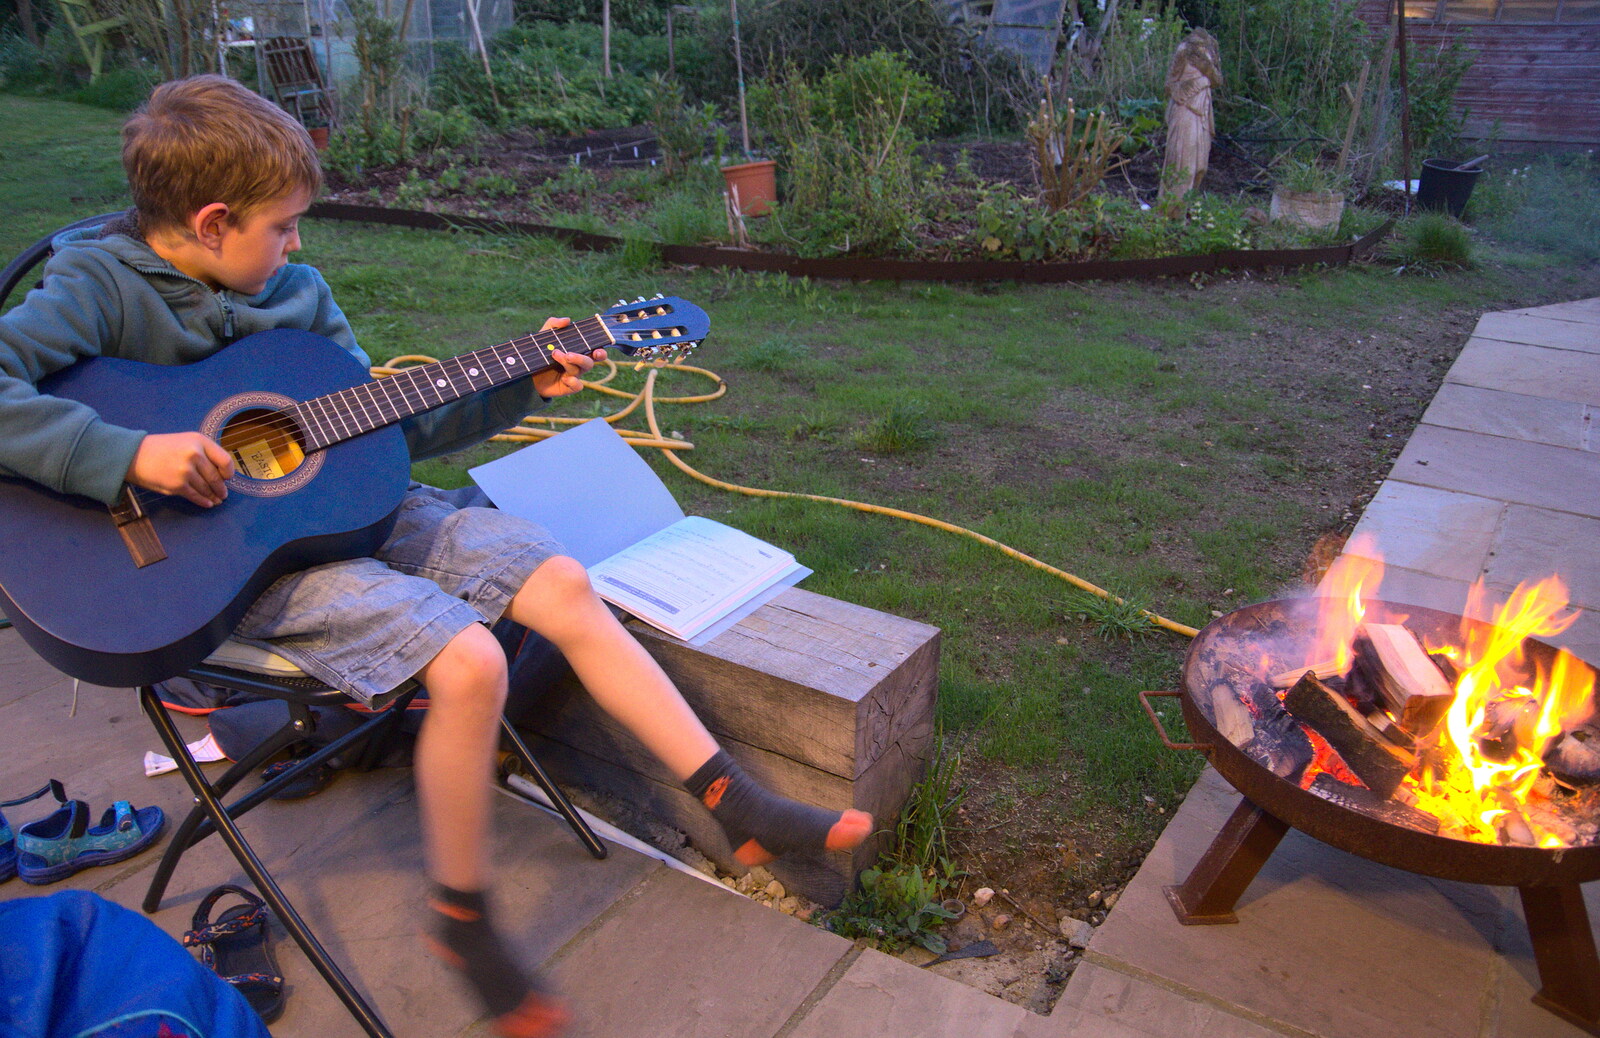 Back at home, Fred plays guitar round the fire from Beer, Bikes and Bands, Burston Crown, Burston, Norfolk - 6th May 2018